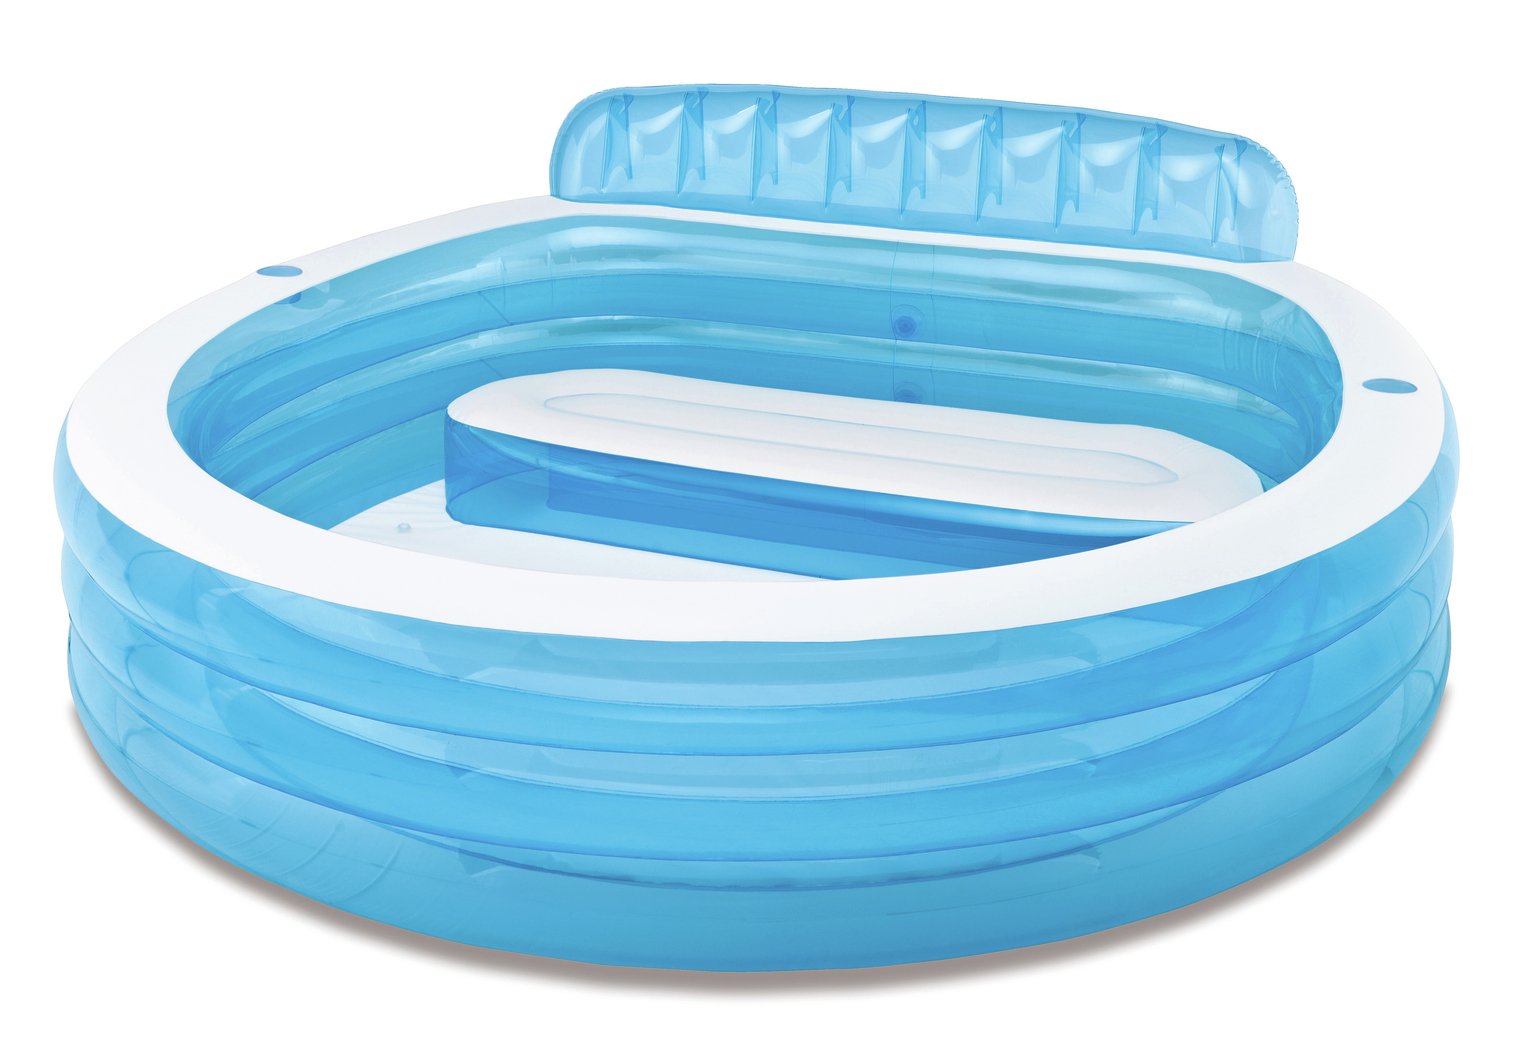 Intex 7.5ft Swim Centre Round Family Pool with Chair Review